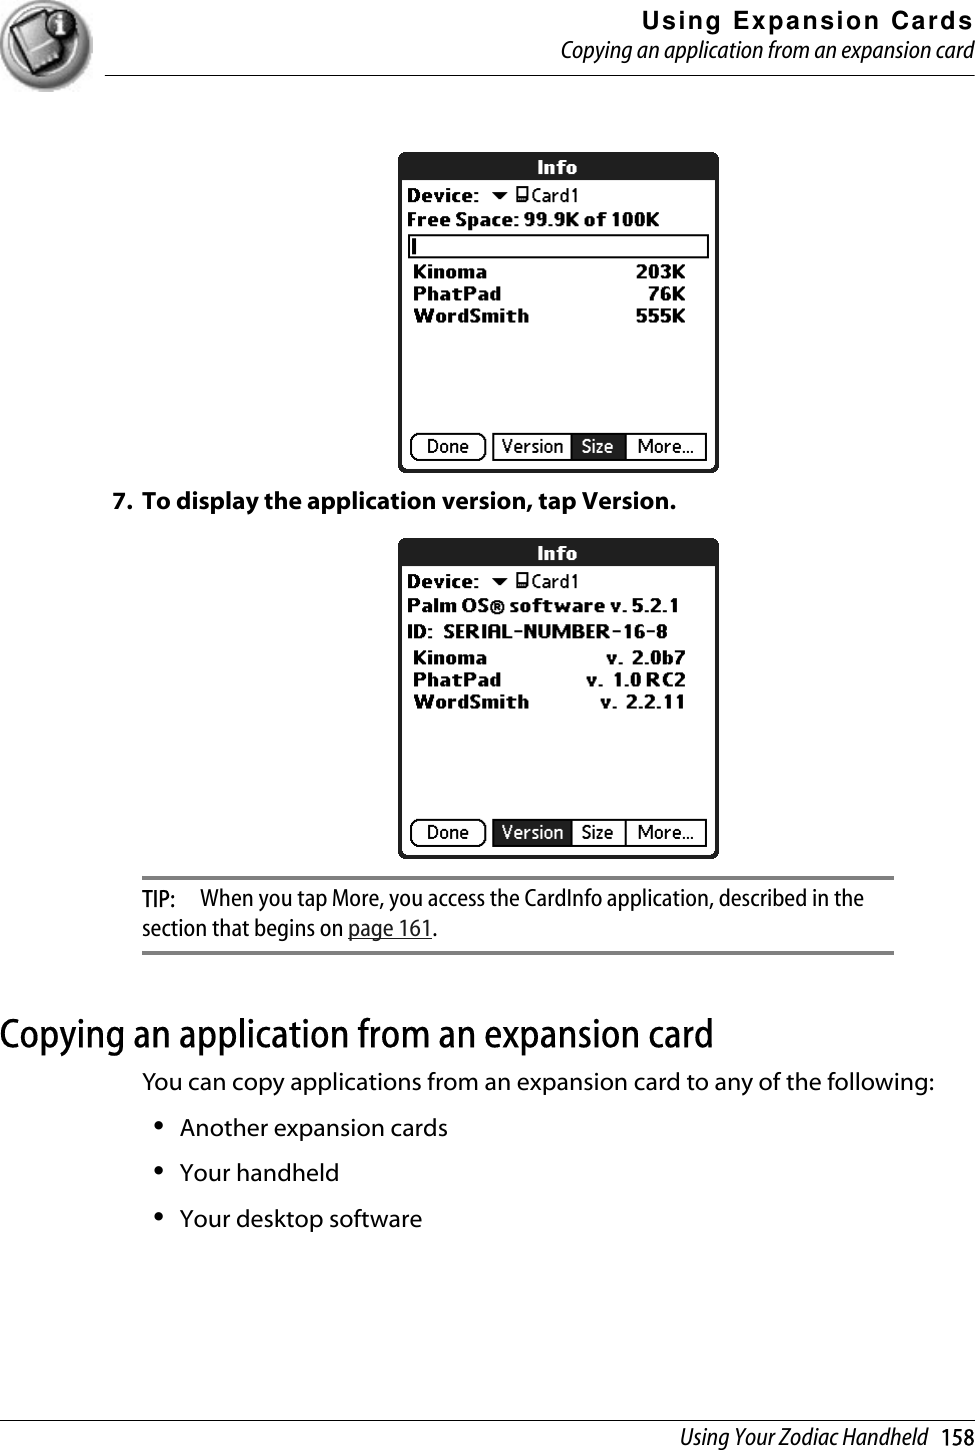 Using Expansion CardsCopying an application from an expansion cardUsing Your Zodiac Handheld   1587. To display the application version, tap Version.TIP:  When you tap More, you access the CardInfo application, described in the section that begins on page 161.Copying an application from an expansion cardYou can copy applications from an expansion card to any of the following:•Another expansion cards•Your handheld•Your desktop software